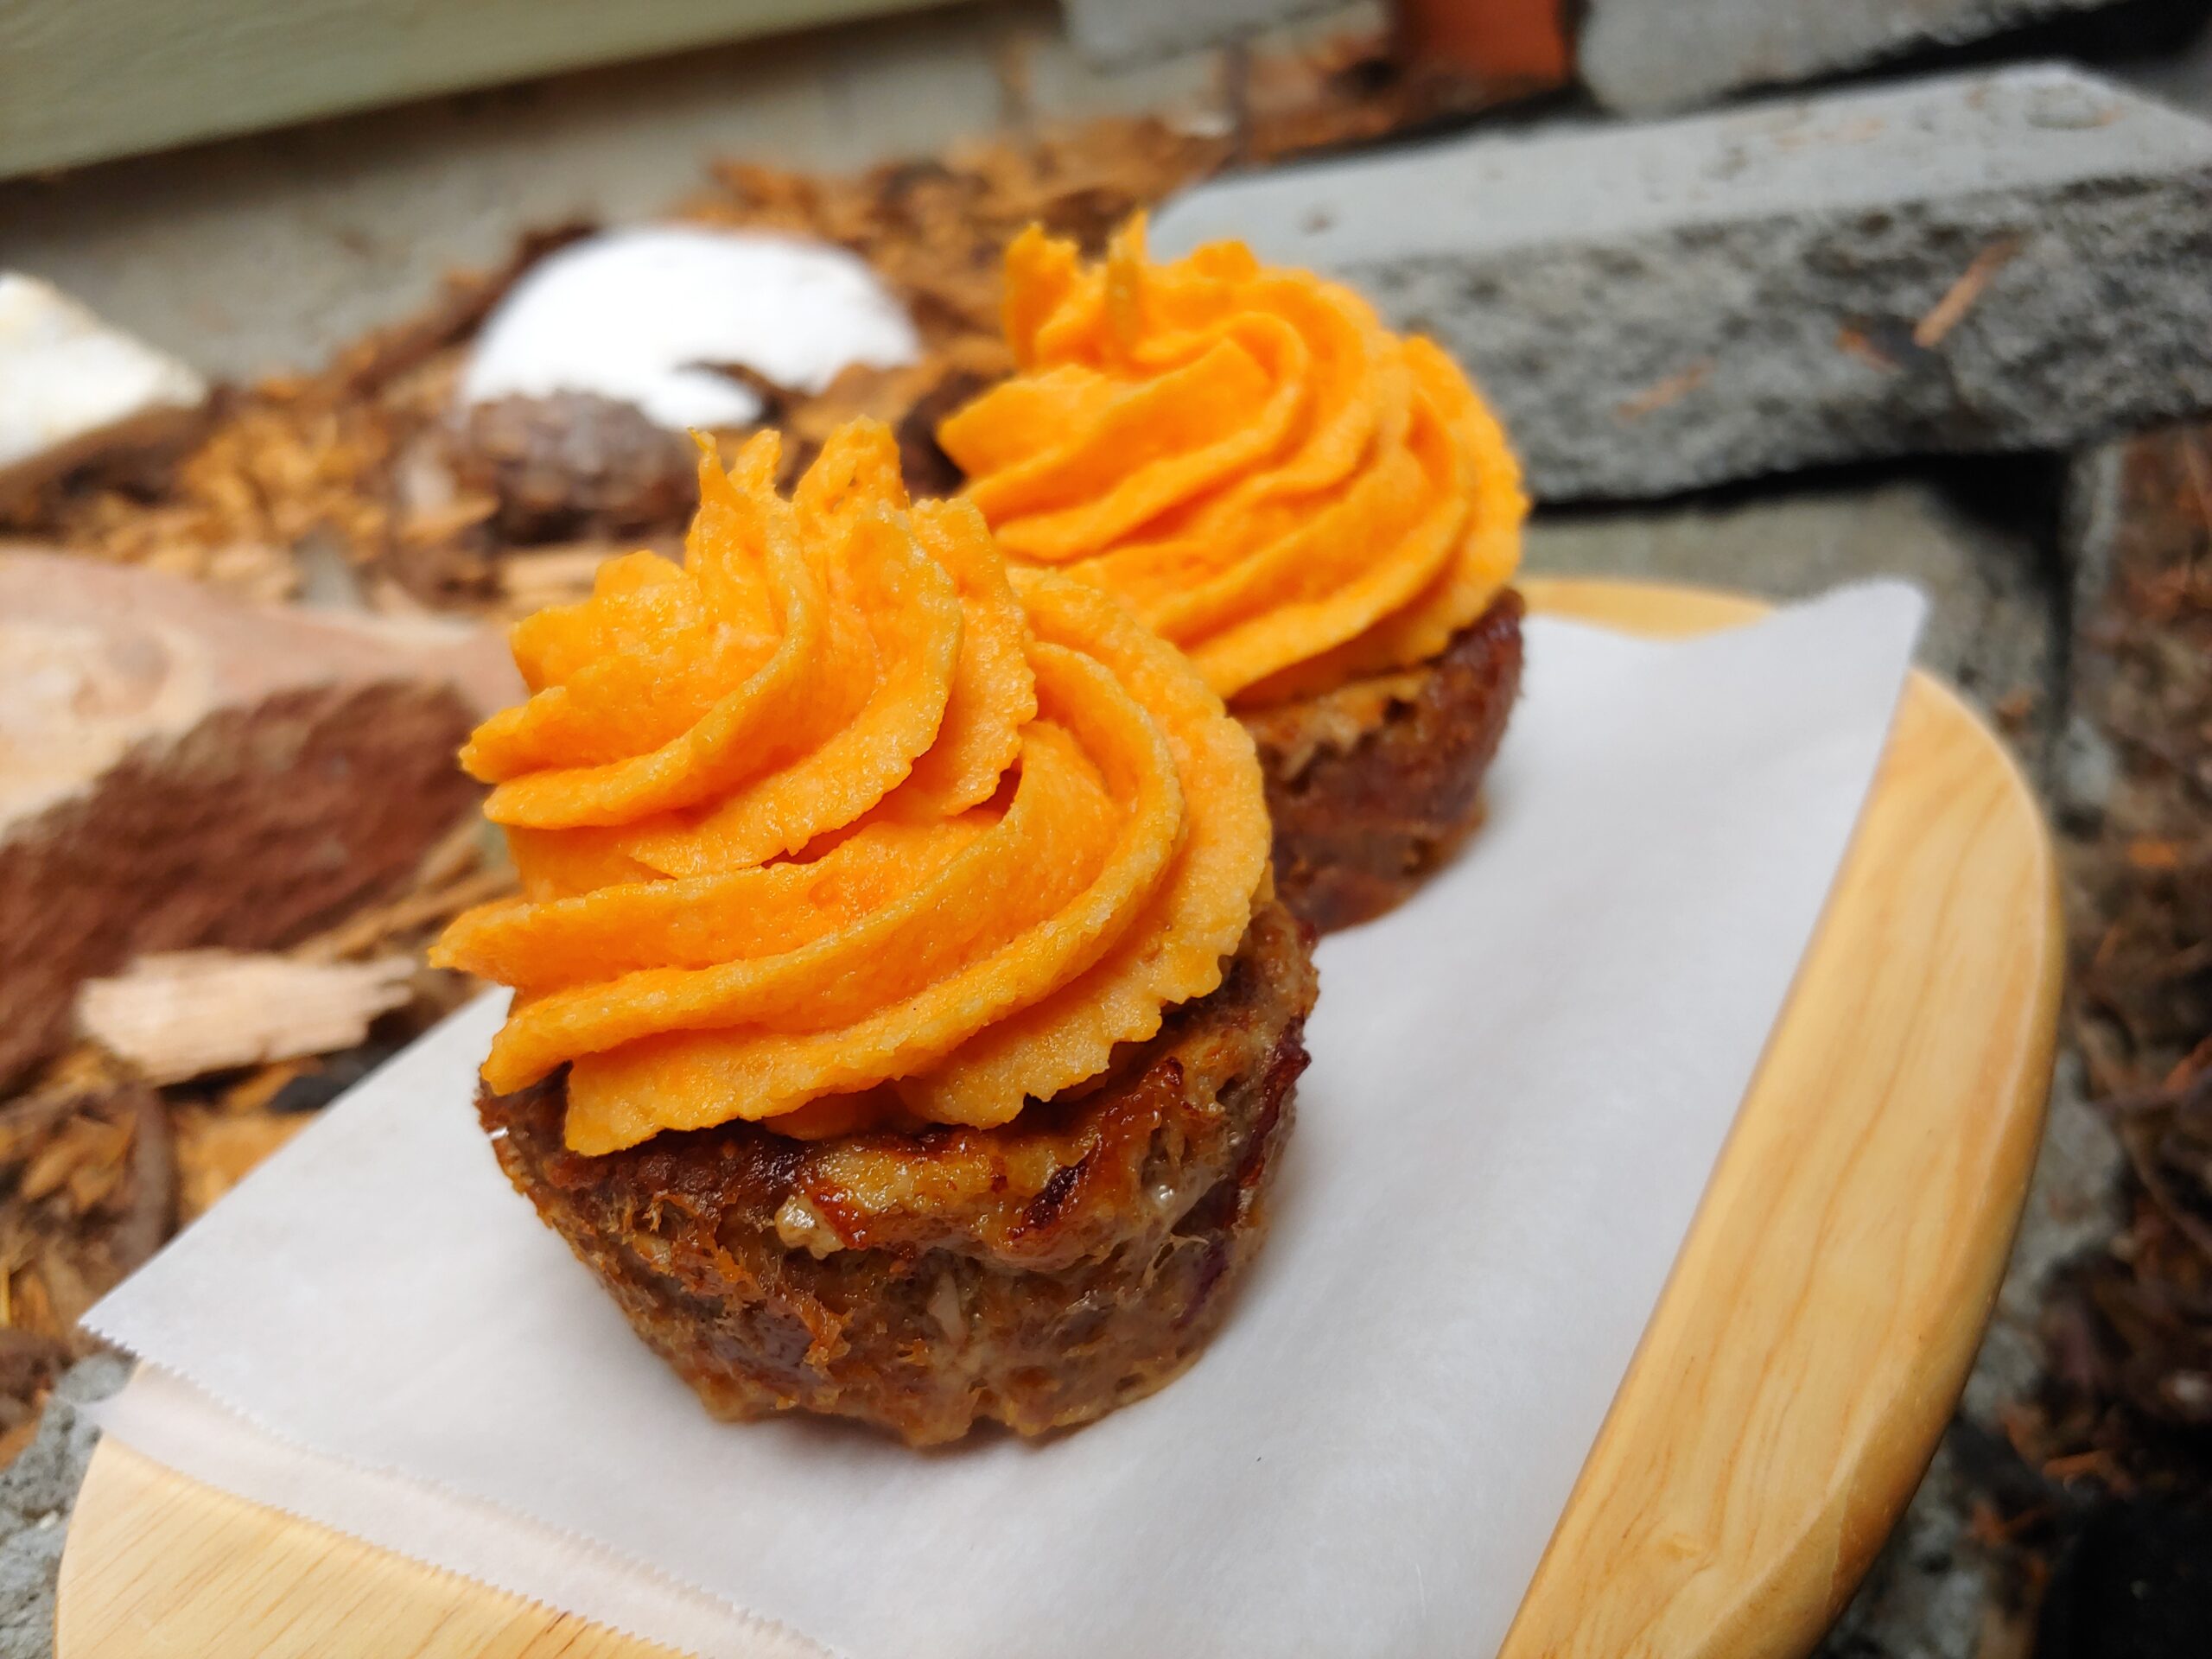 Animal-Based Wagyu Meatloaf Cupcakes with Sweet Potato Frosting